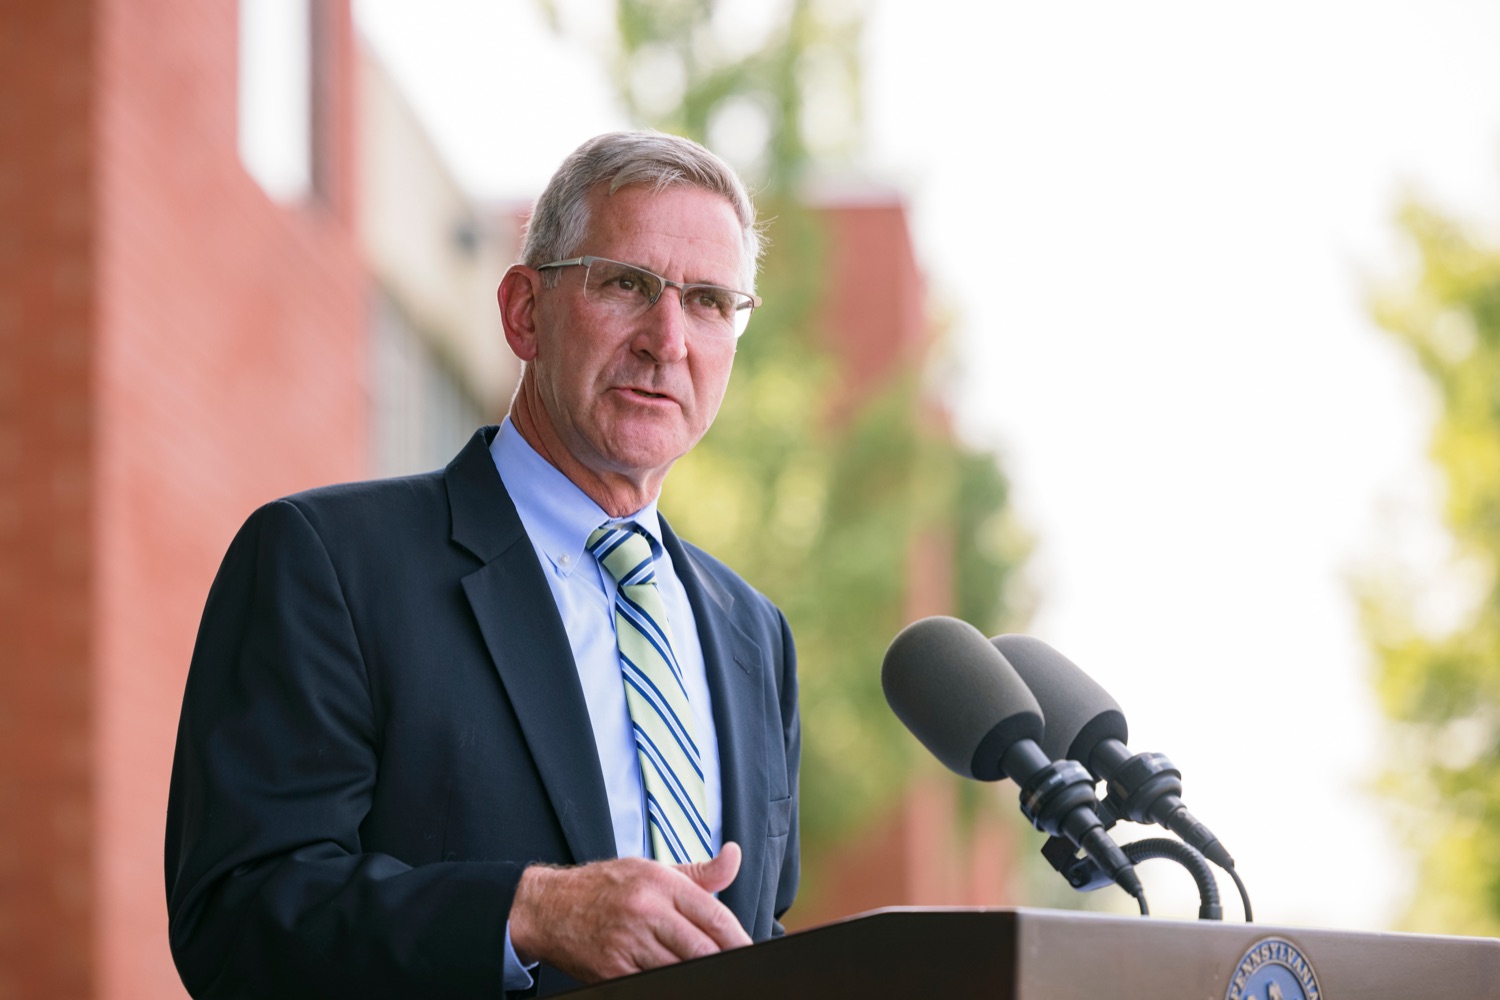 PA Dept. of Agriculture Secretary Russell Redding speaks during a press conference, which highlighted the success of Pennsylvania's farm to school programs, at Hill Top Academy in Mechanicsburg on Friday, August 27, 2021.<br><a href="https://filesource.amperwave.net/commonwealthofpa/photo/19054_AGRIC_FarmToSchool_NK_005.jpg" target="_blank">⇣ Download Photo</a>